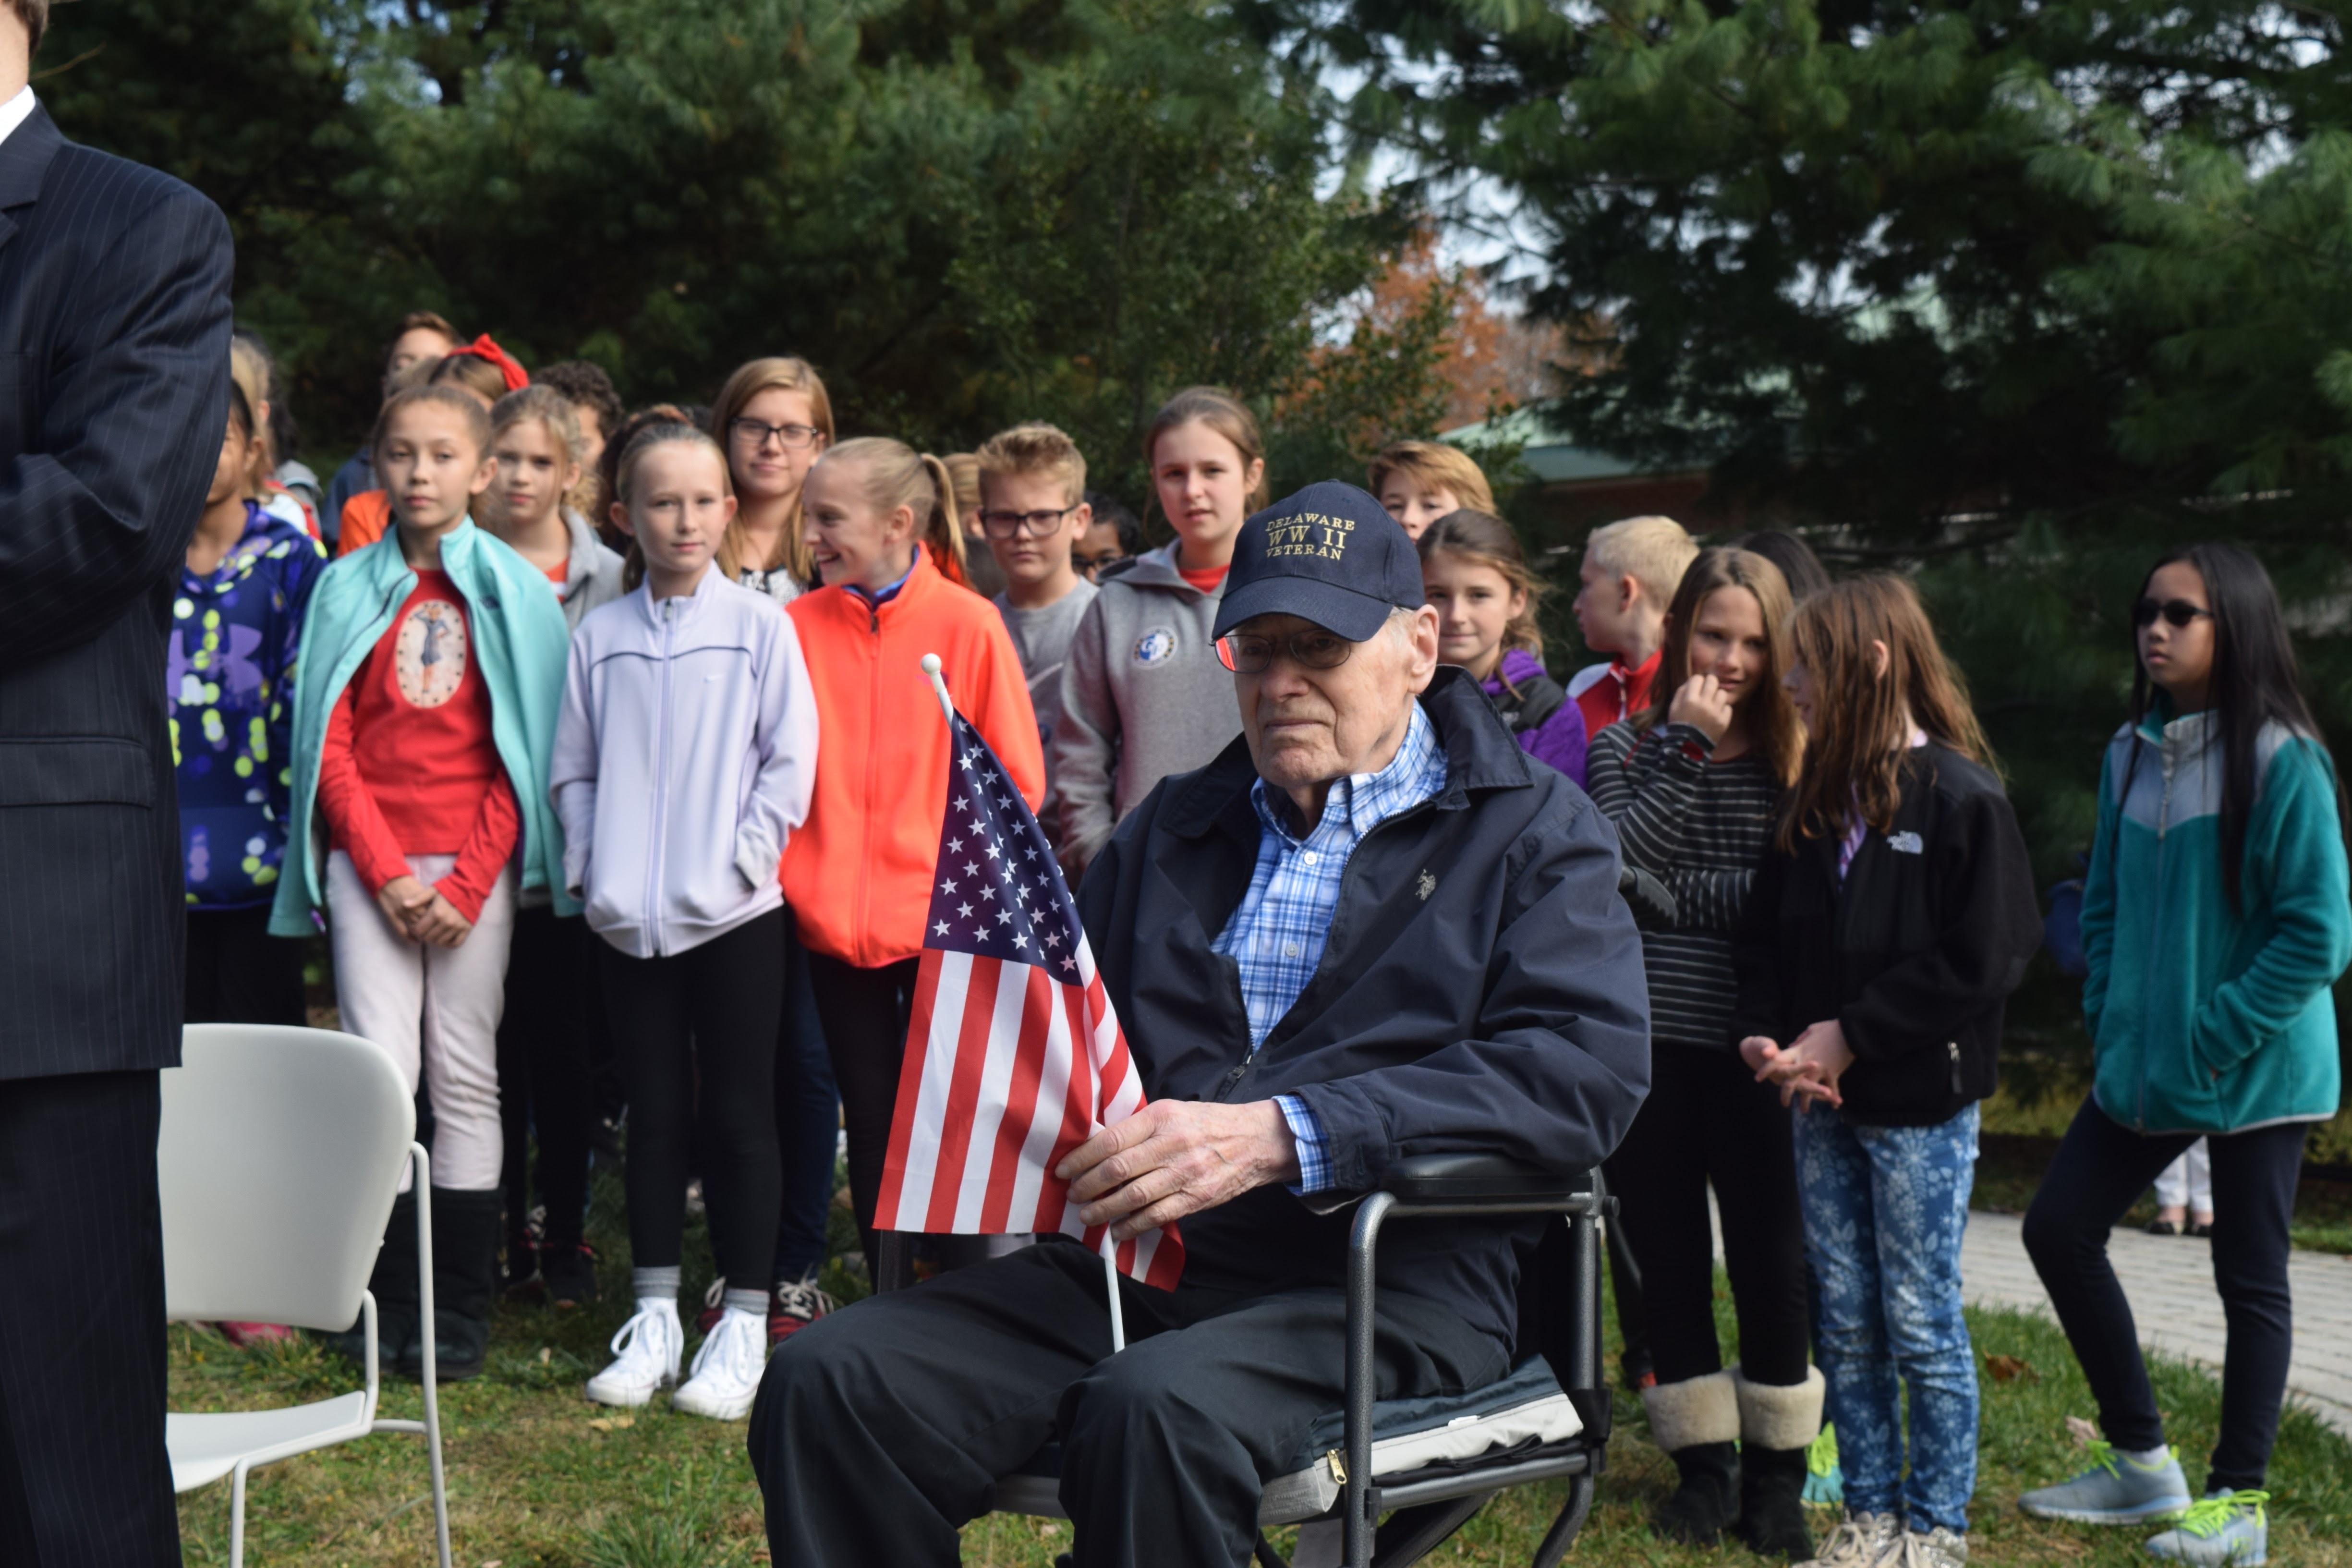 Special guest Howard Jester, World War II Army combat parachutist and Great Falls resident, observes the Veterans Day ceremony at the Freedom Memorial in Great Falls, Virginia